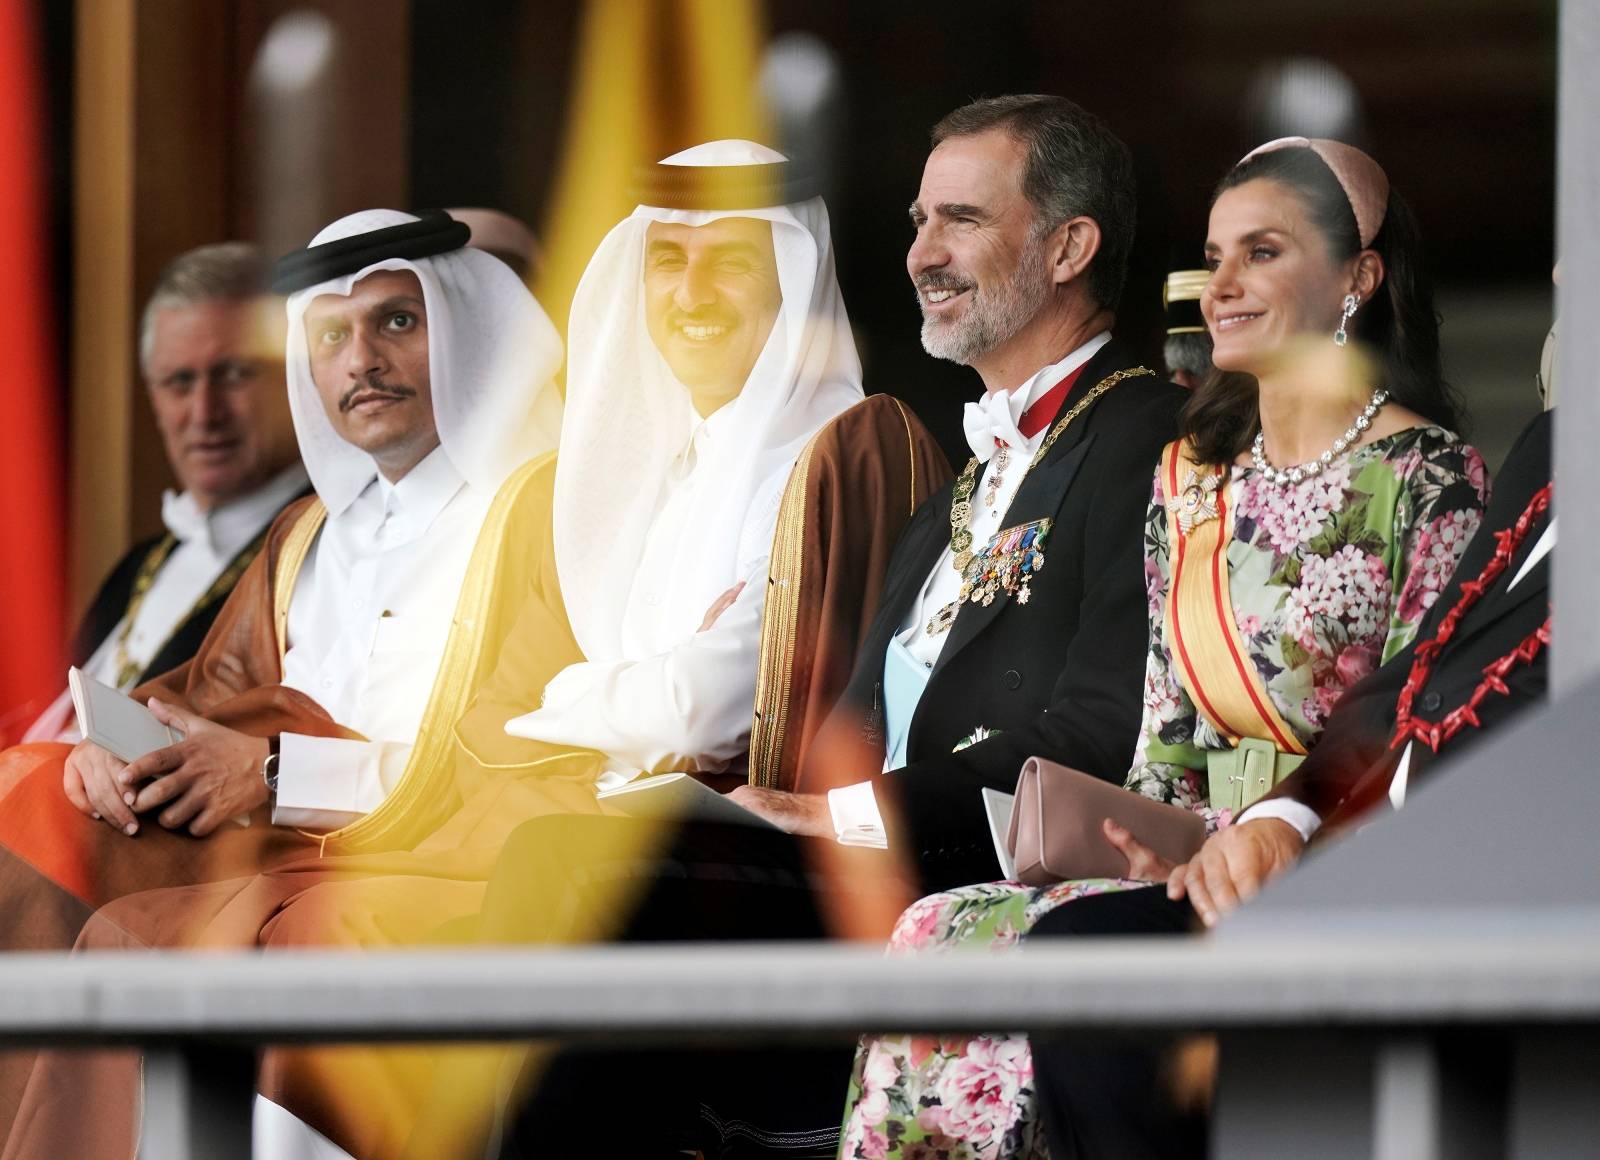 Spanish King Felipe VI and Queen Letizia attend the enthronement ceremony of Japan's Emperor Naruhito at the Imperial Palace in Tokyo